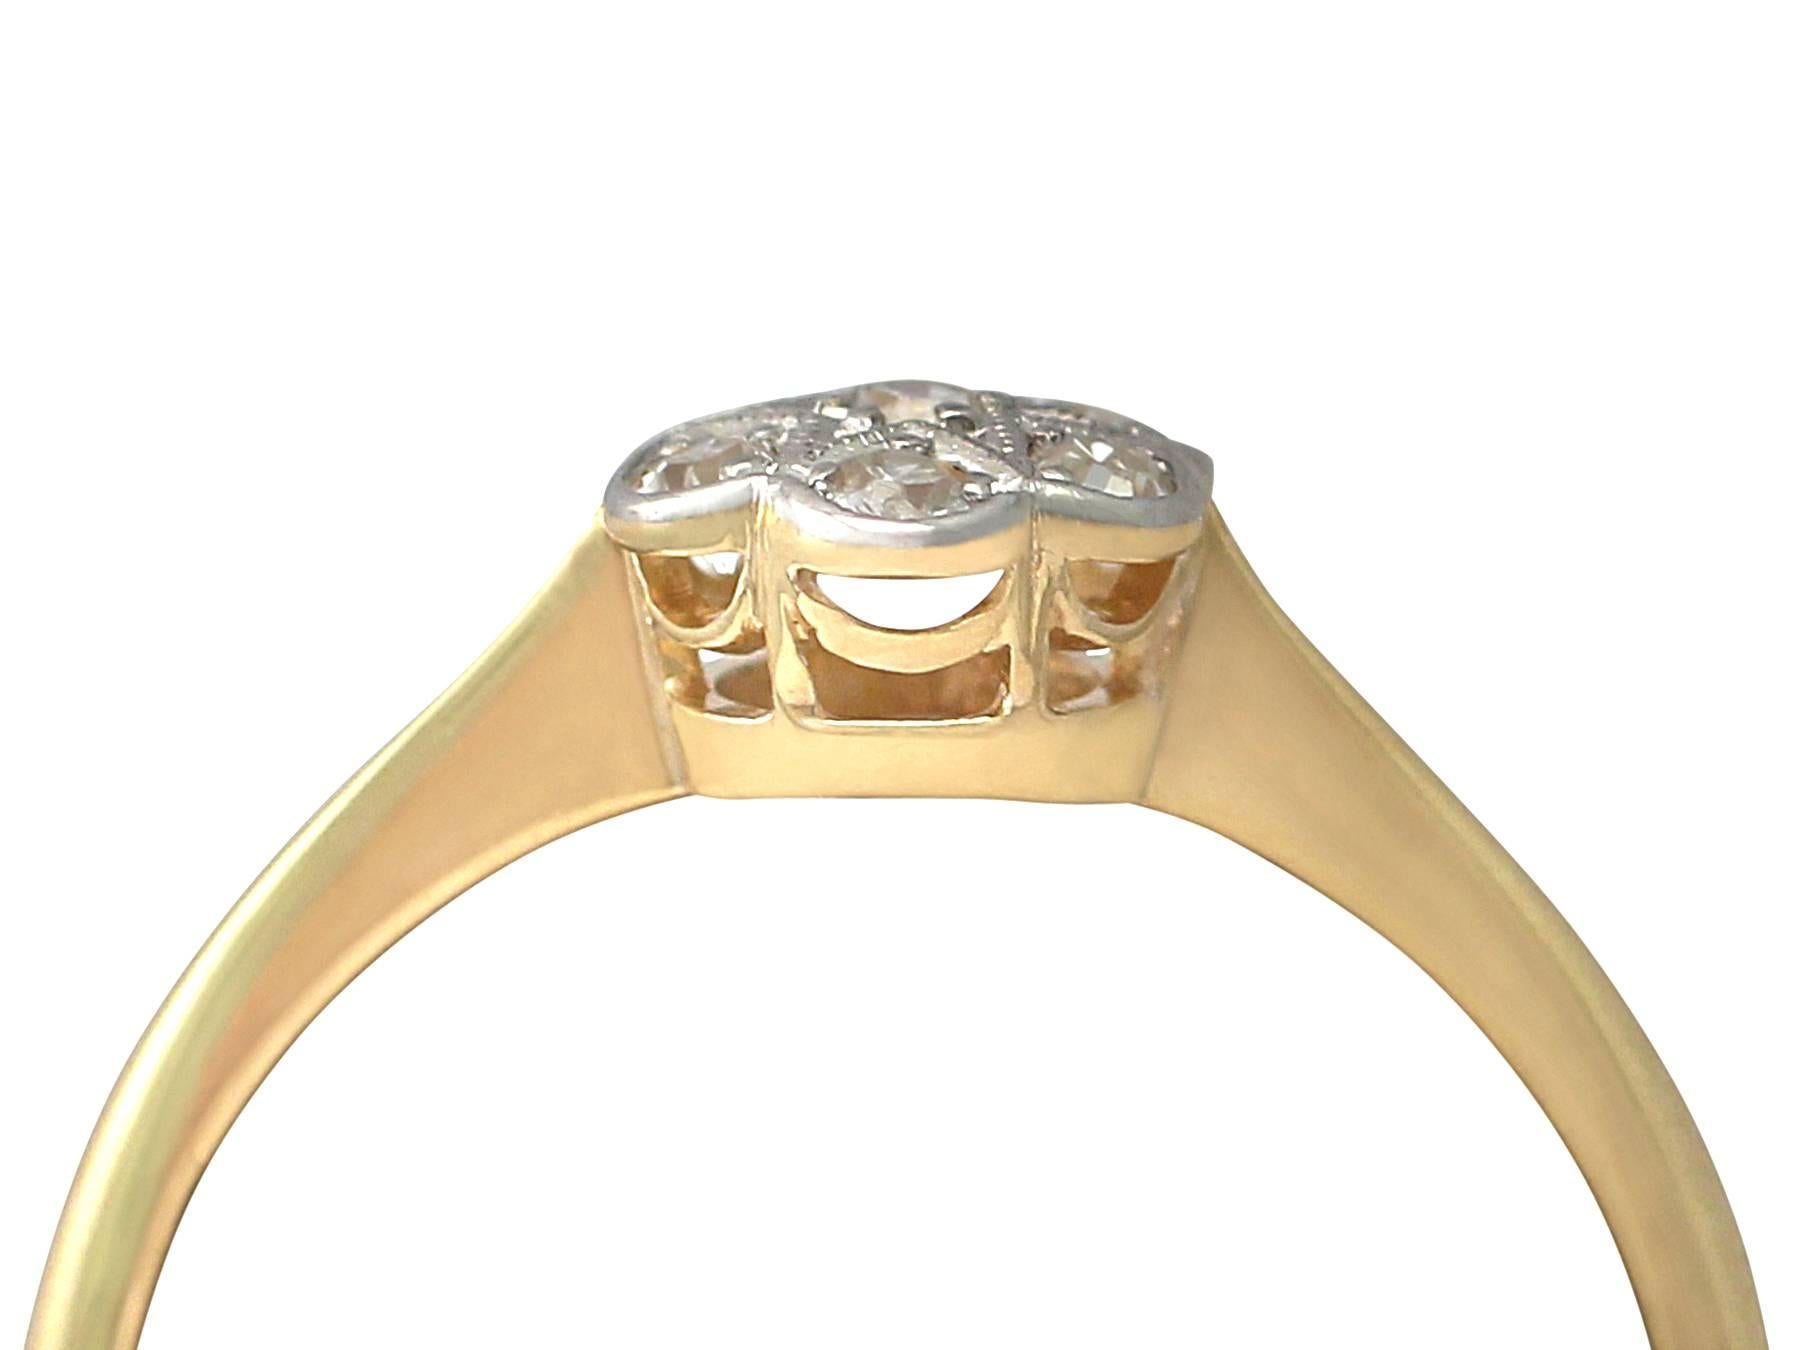 A fine and impressive vintage 0.22 carat diamond cluster ring, in 18 karat yellow gold with a platinum setting; part of our vintage jewelry and estate jewelry collections

This fine and impressive vintage diamond cluster ring has been crafted in 18k